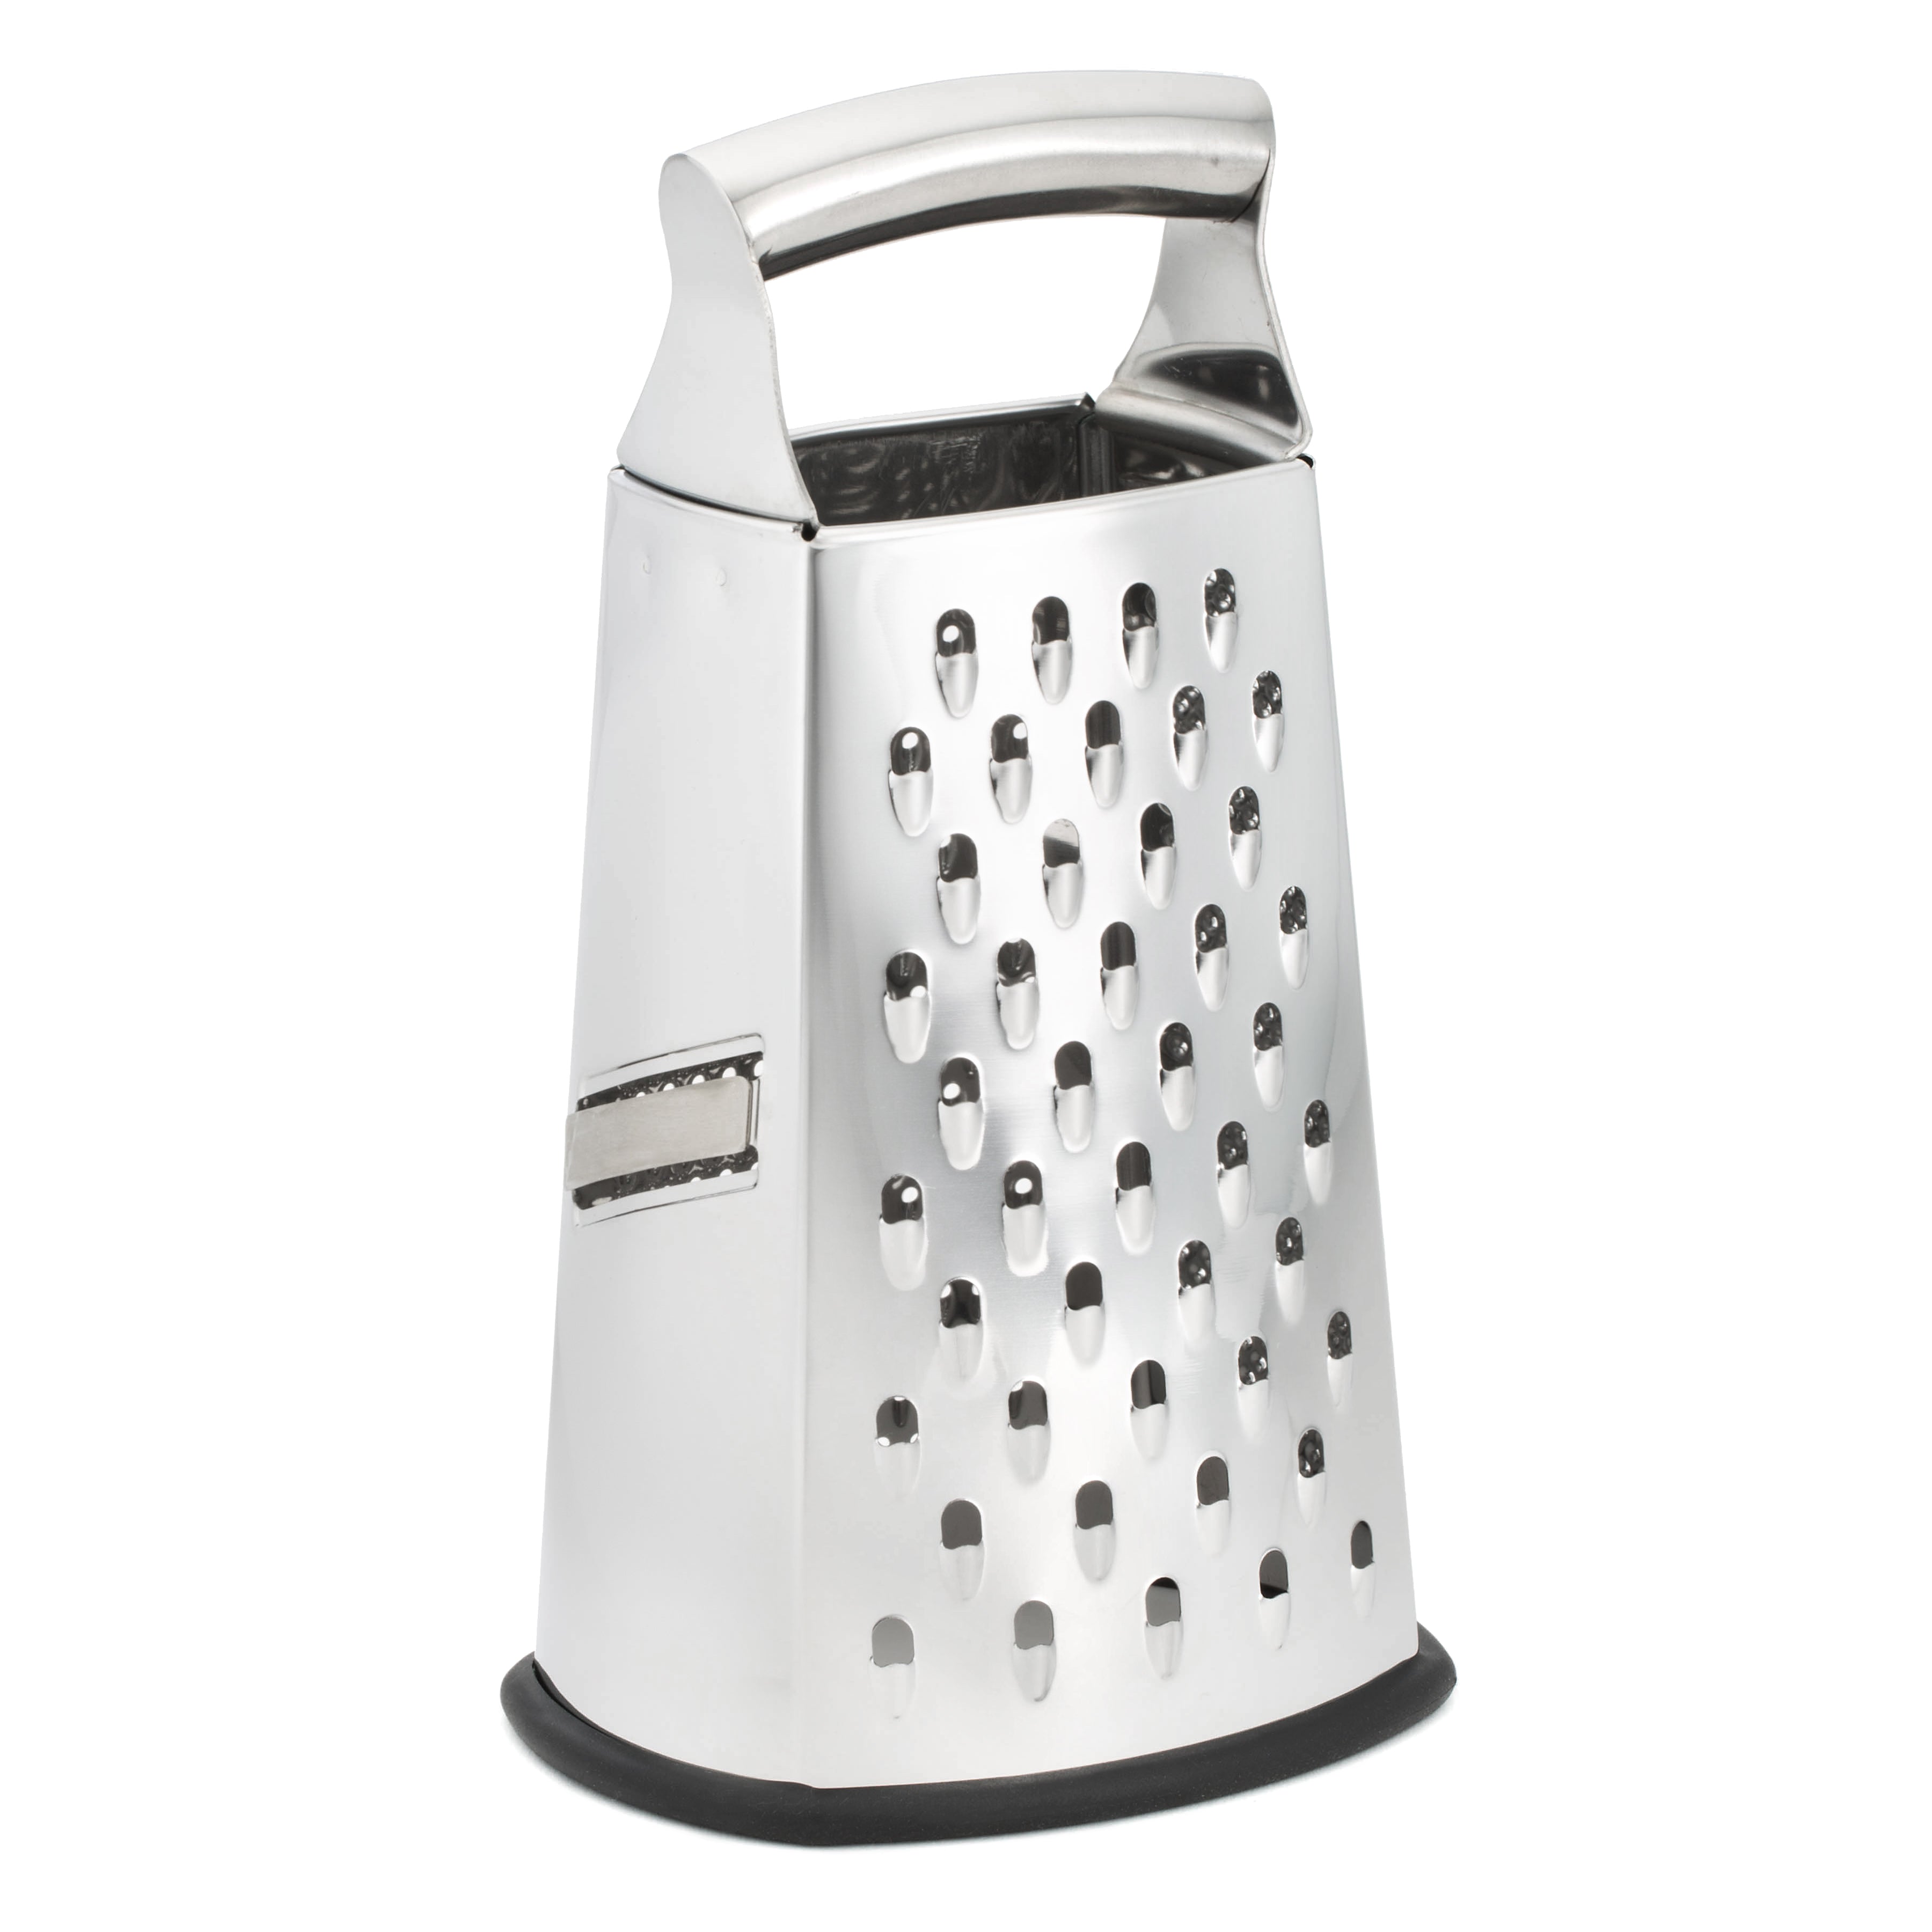 Spring Chef Professional Cheese Grater - Stainless Steel Box Grater for  Kitchen, XL Size, 4 Sides - Perfect Shredder for Parmesan Cheese, Carrot